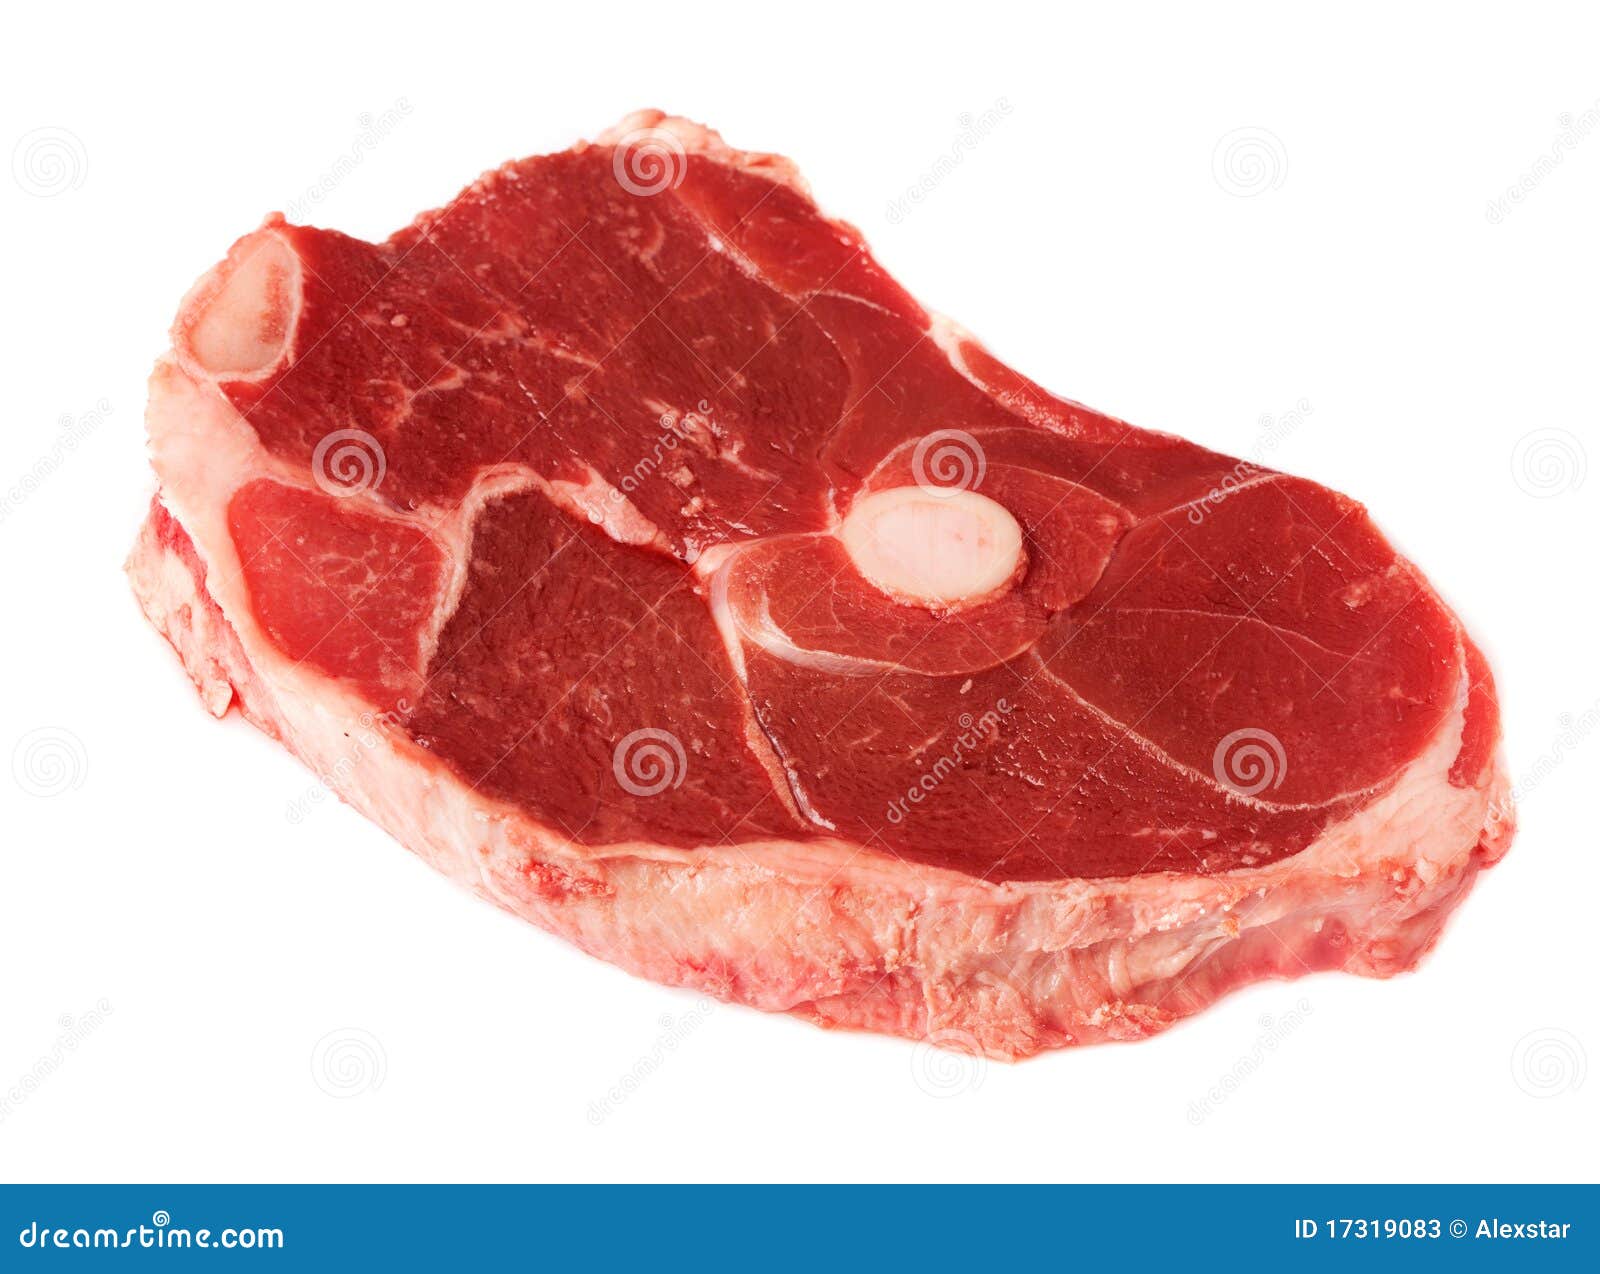 cut of red meat